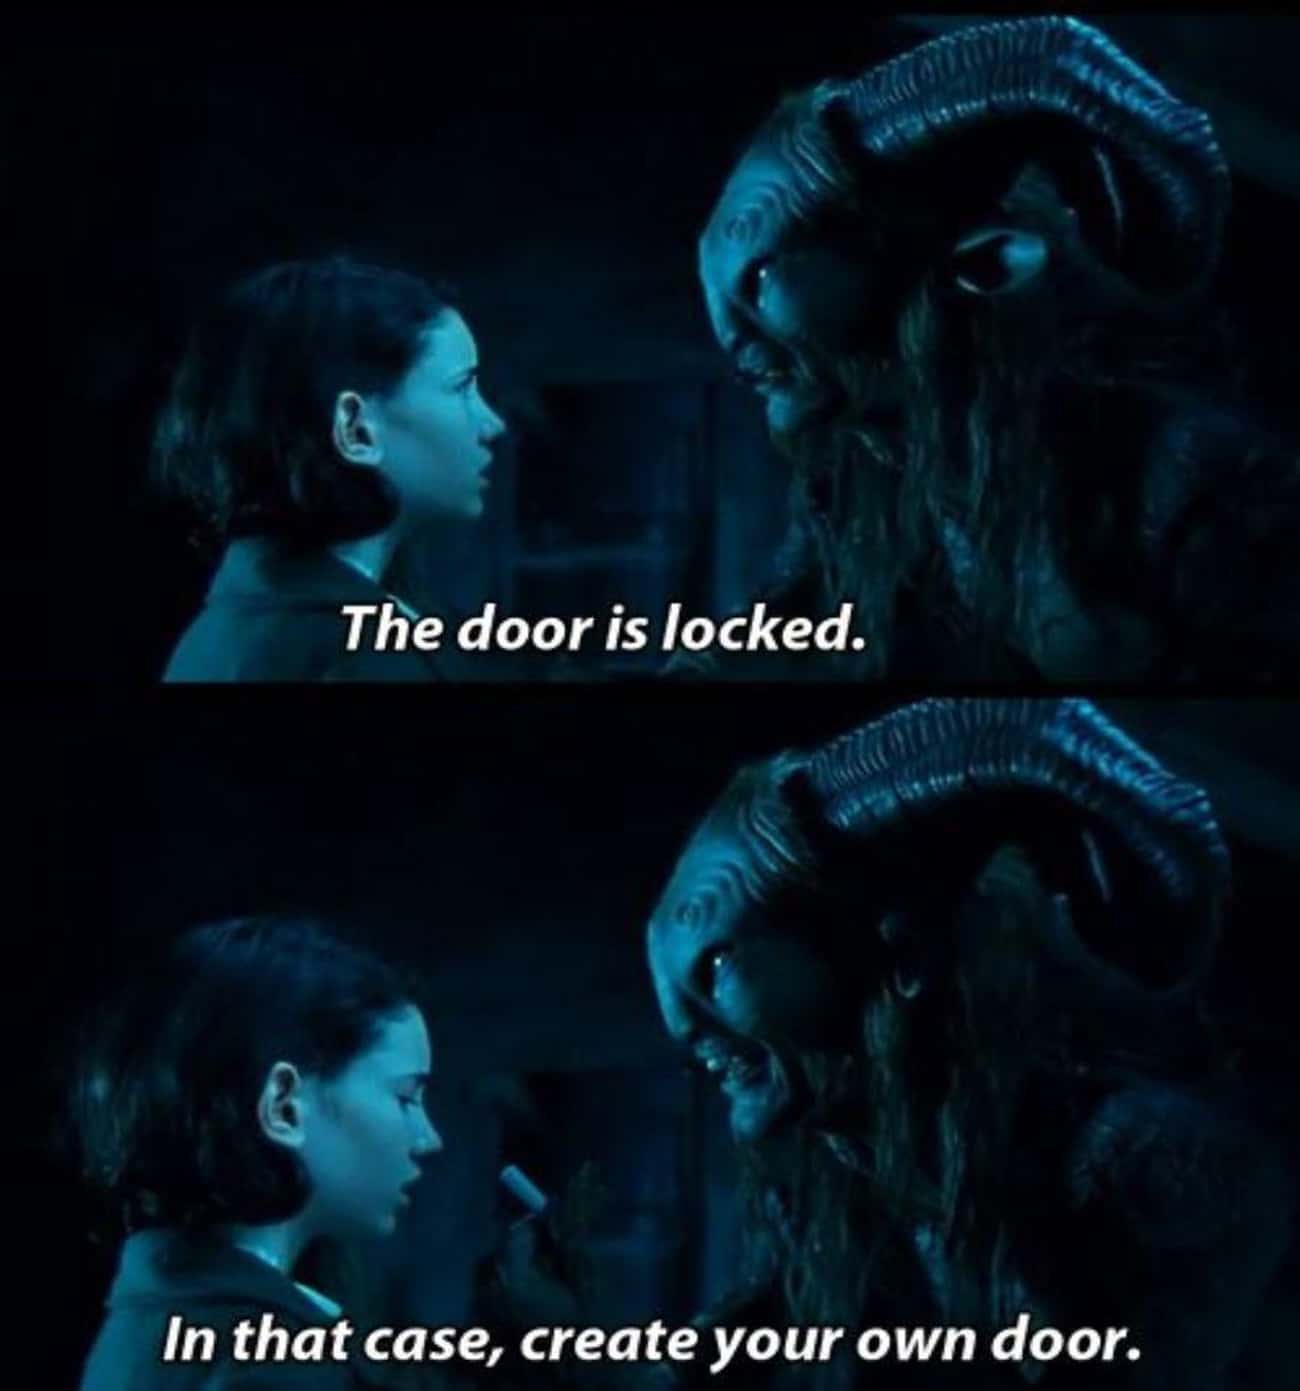  Guillermo del Toro Wrote Every Bit Of 'Pan's Labyrinth'